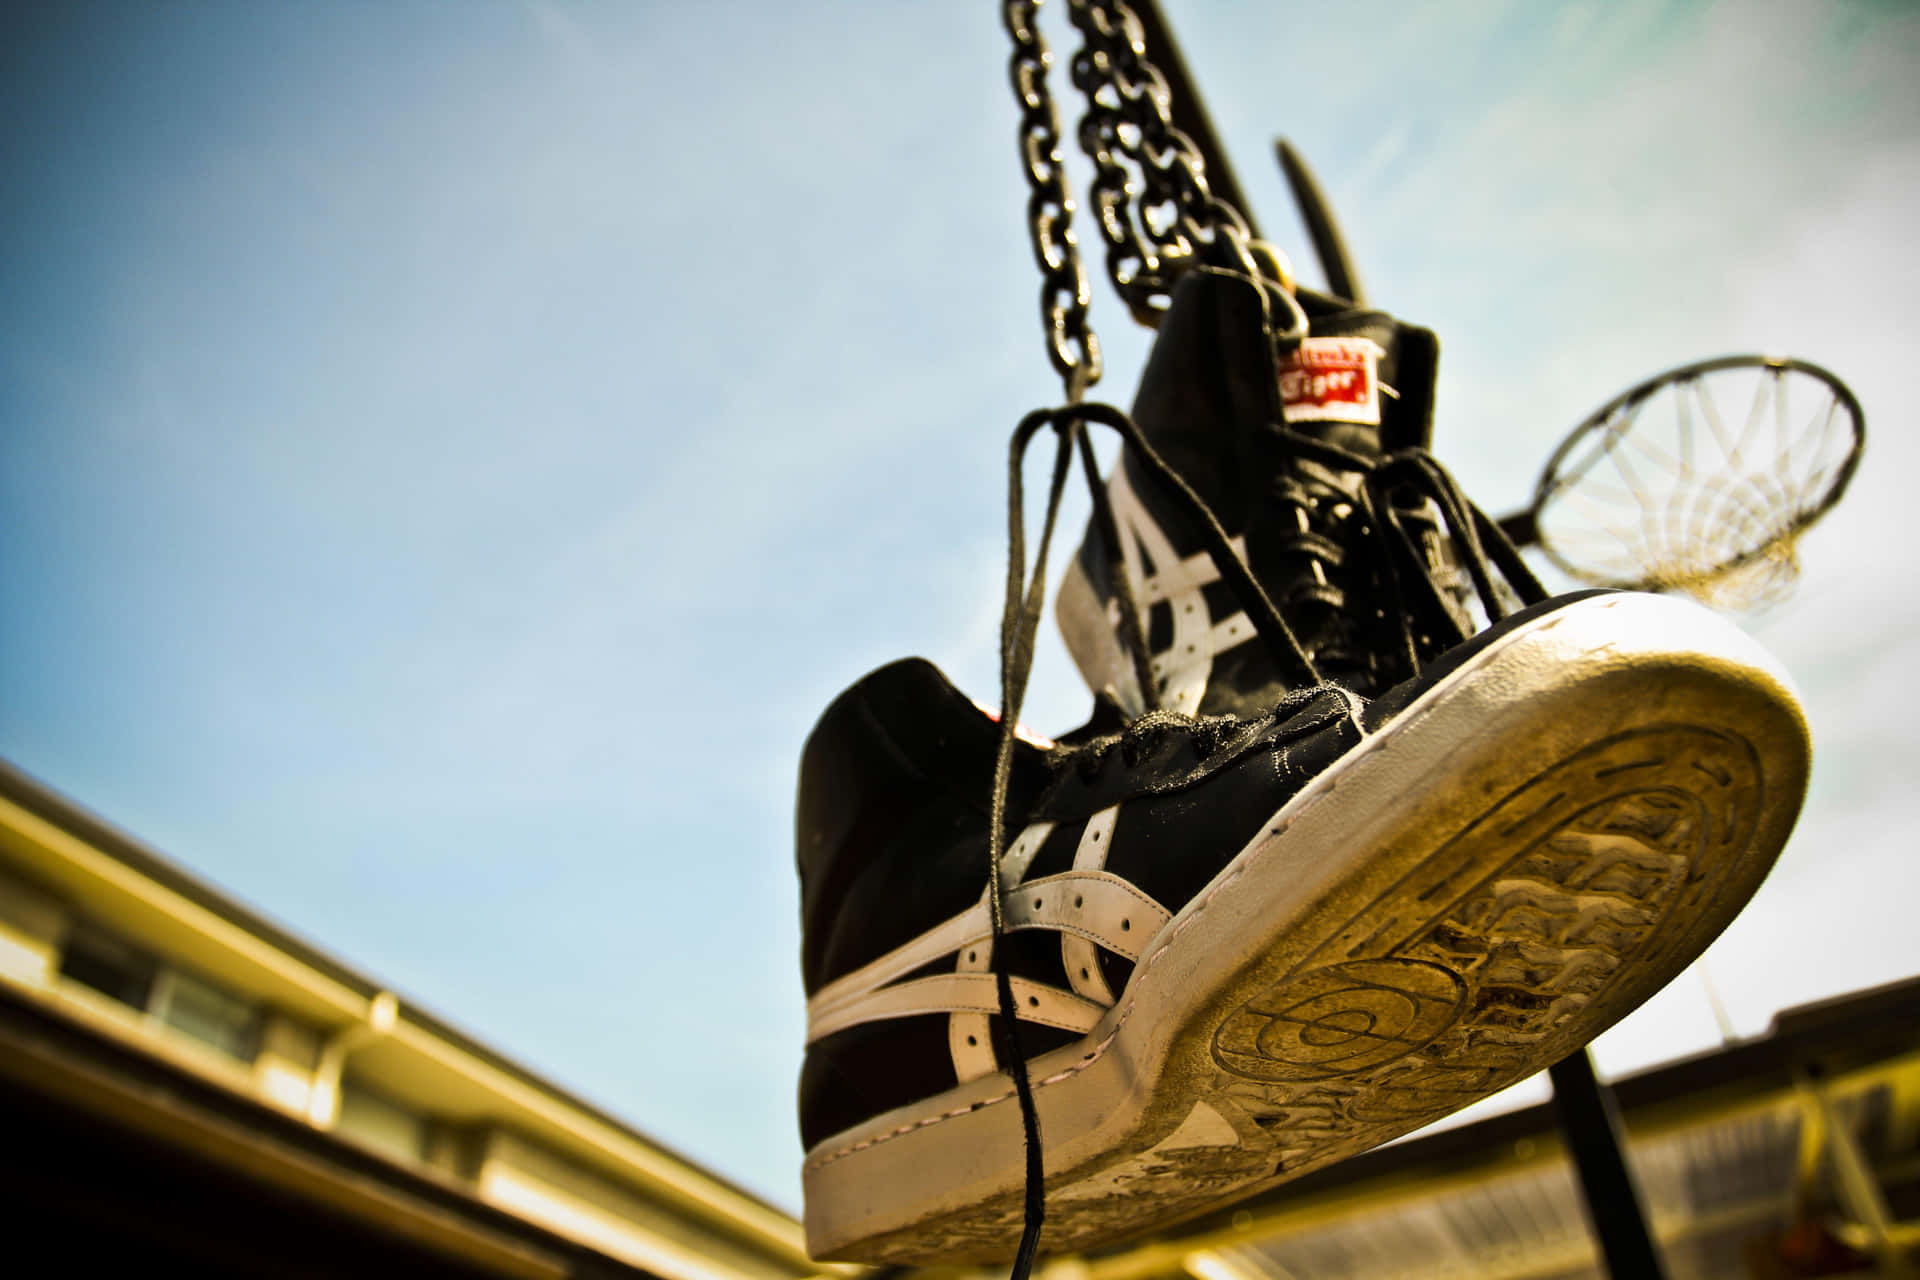 A Black And White Shoe Hanging From A Chain